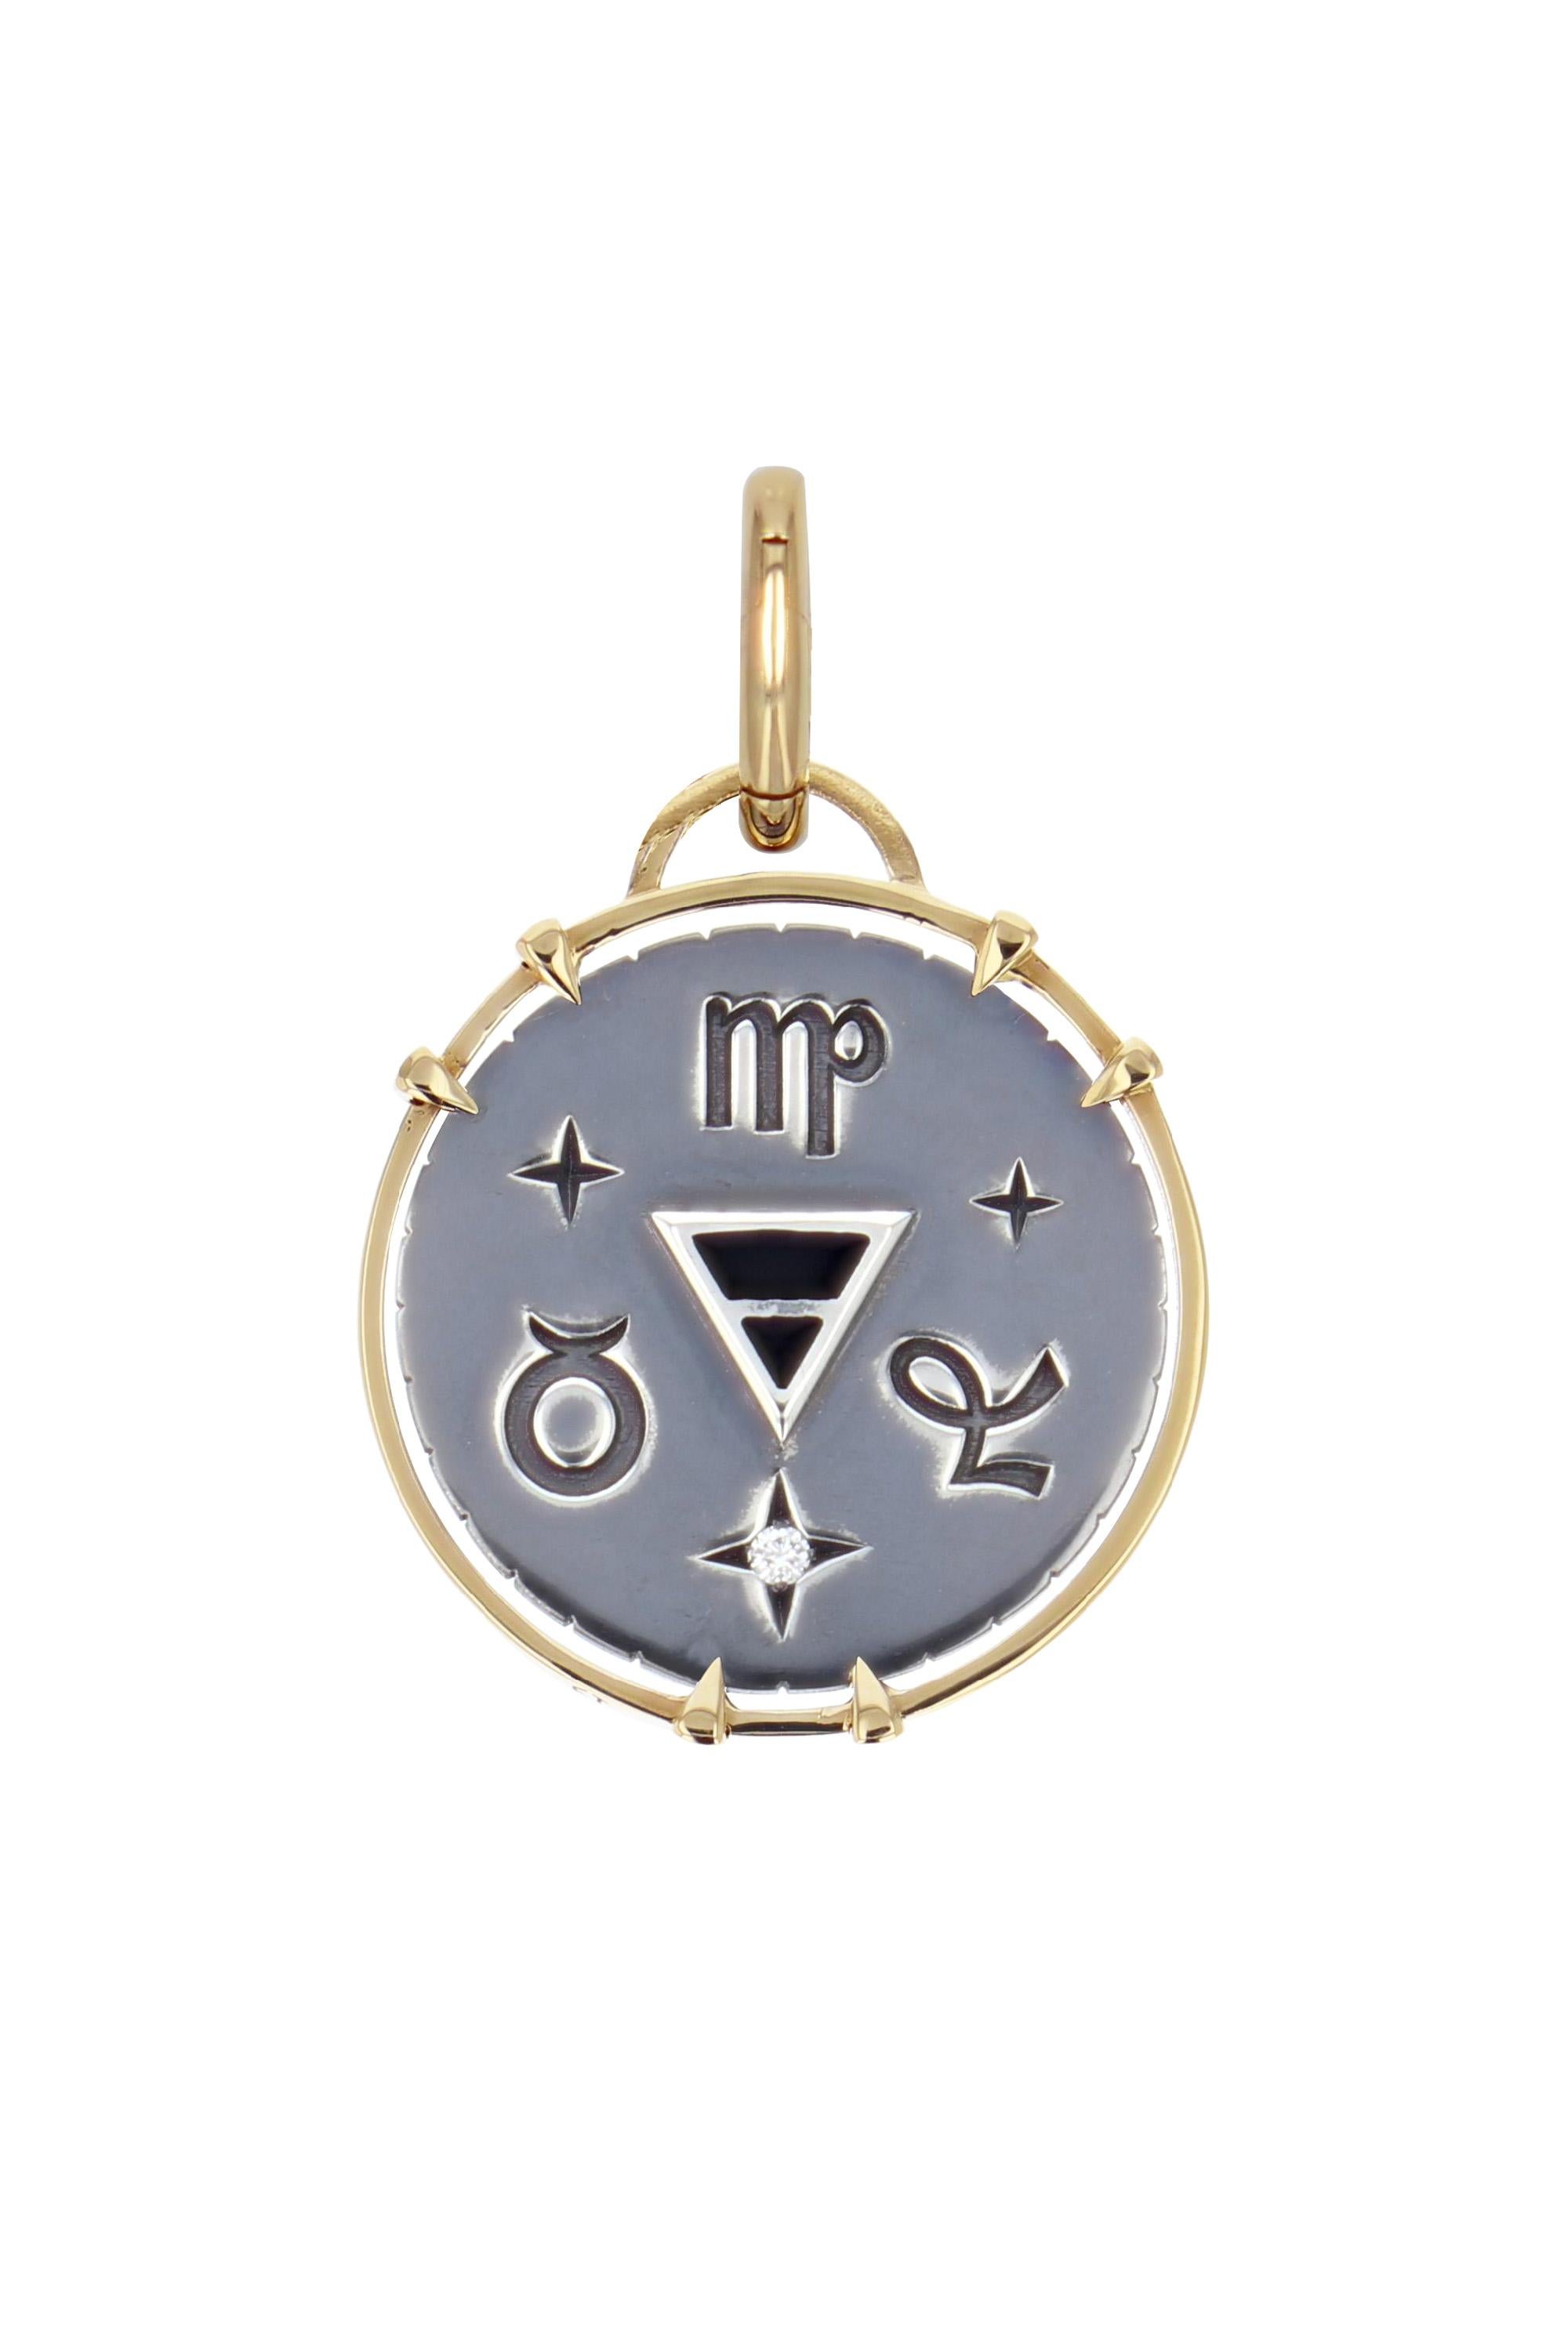 Yellow gold and distressed silver charm. Studded with a diamond, the charm embraces all the symbols linked to the Earth sign with a gold tile on its front and the alchemy triangle surrounded by its zodiac signs (Virgo, Capricorn, Taurus) on its